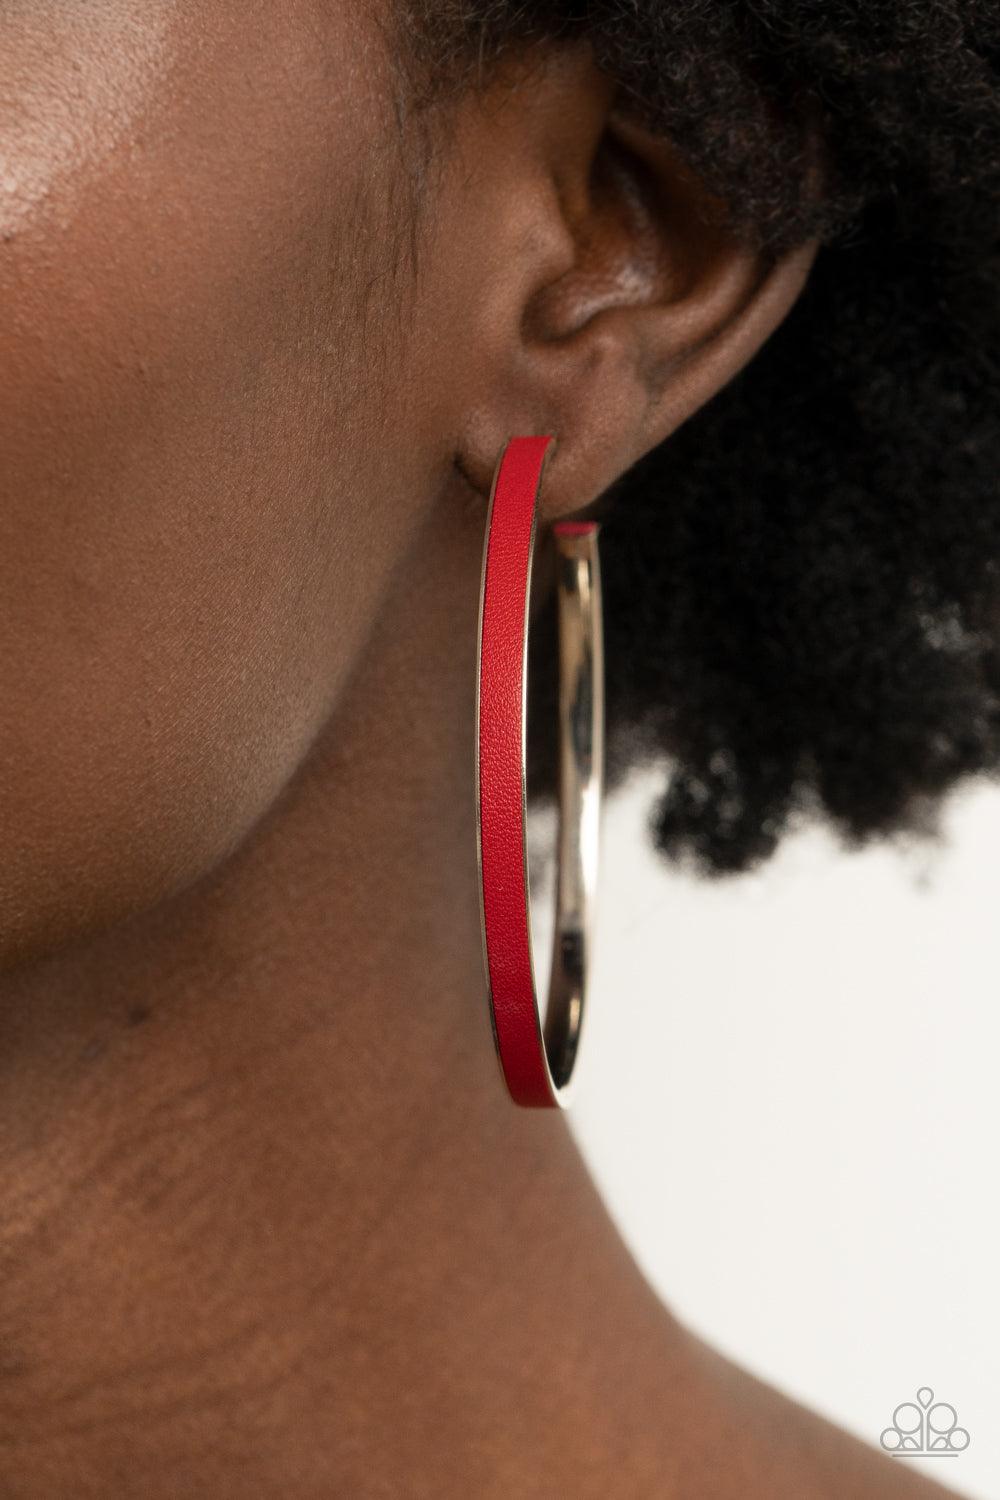 Paparazzi Accessories Fearless Flavor - Red A red leather lace is pressed along the indented spine of a silver hoop, creating a bold pop of color. Earring attaches to a standard post fitting. Hoop measures approximately 2 1/4" in diameter. Sold as one pai